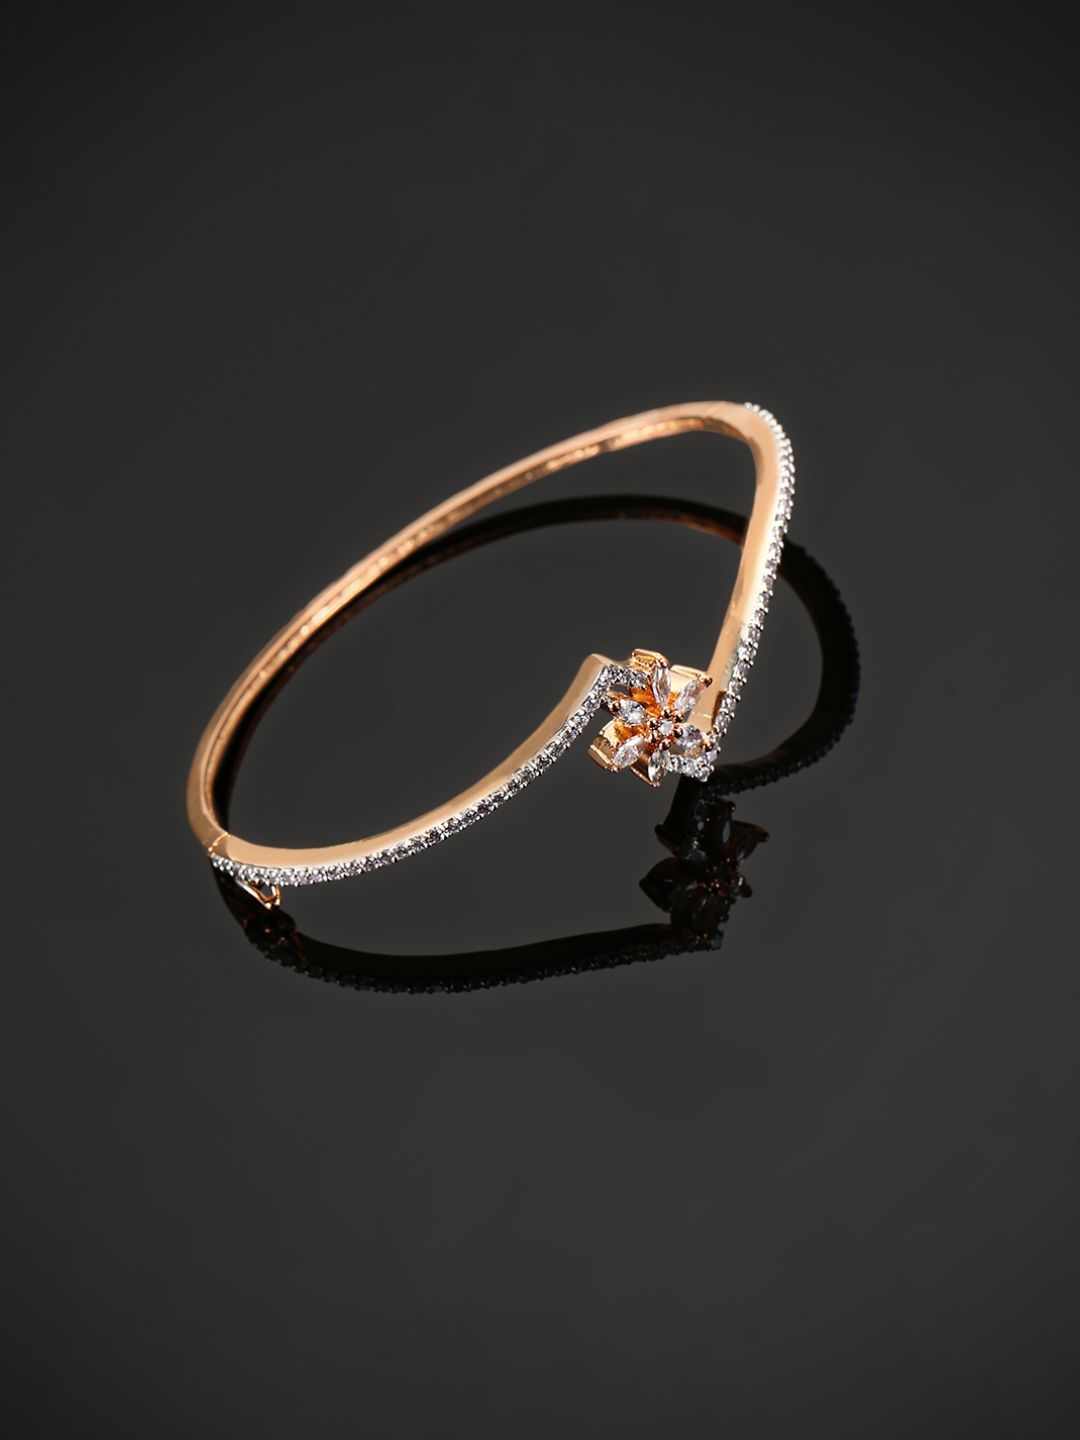 Priyaasi Rose Gold-Plated AD-Studded Handcrafted Floral Shaped Bangle Style Bracelet Price in India